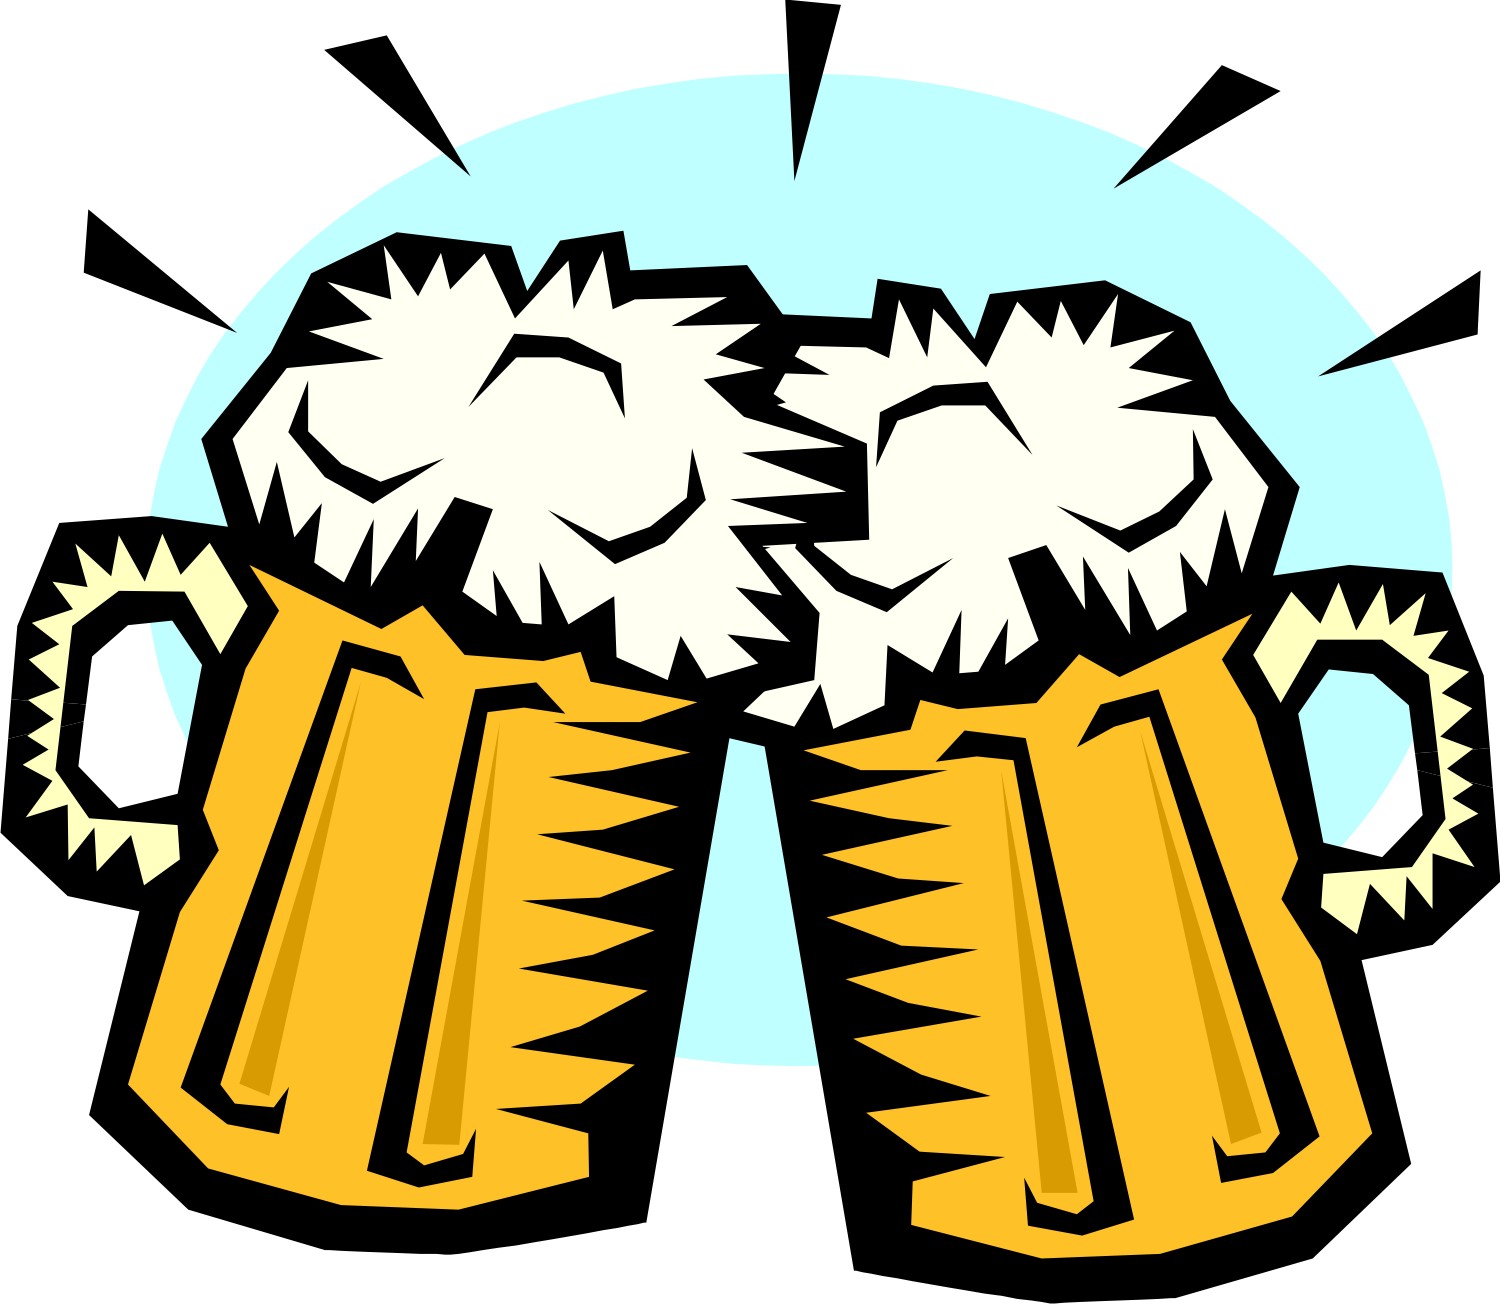 Beer Drawing - ClipArt Best